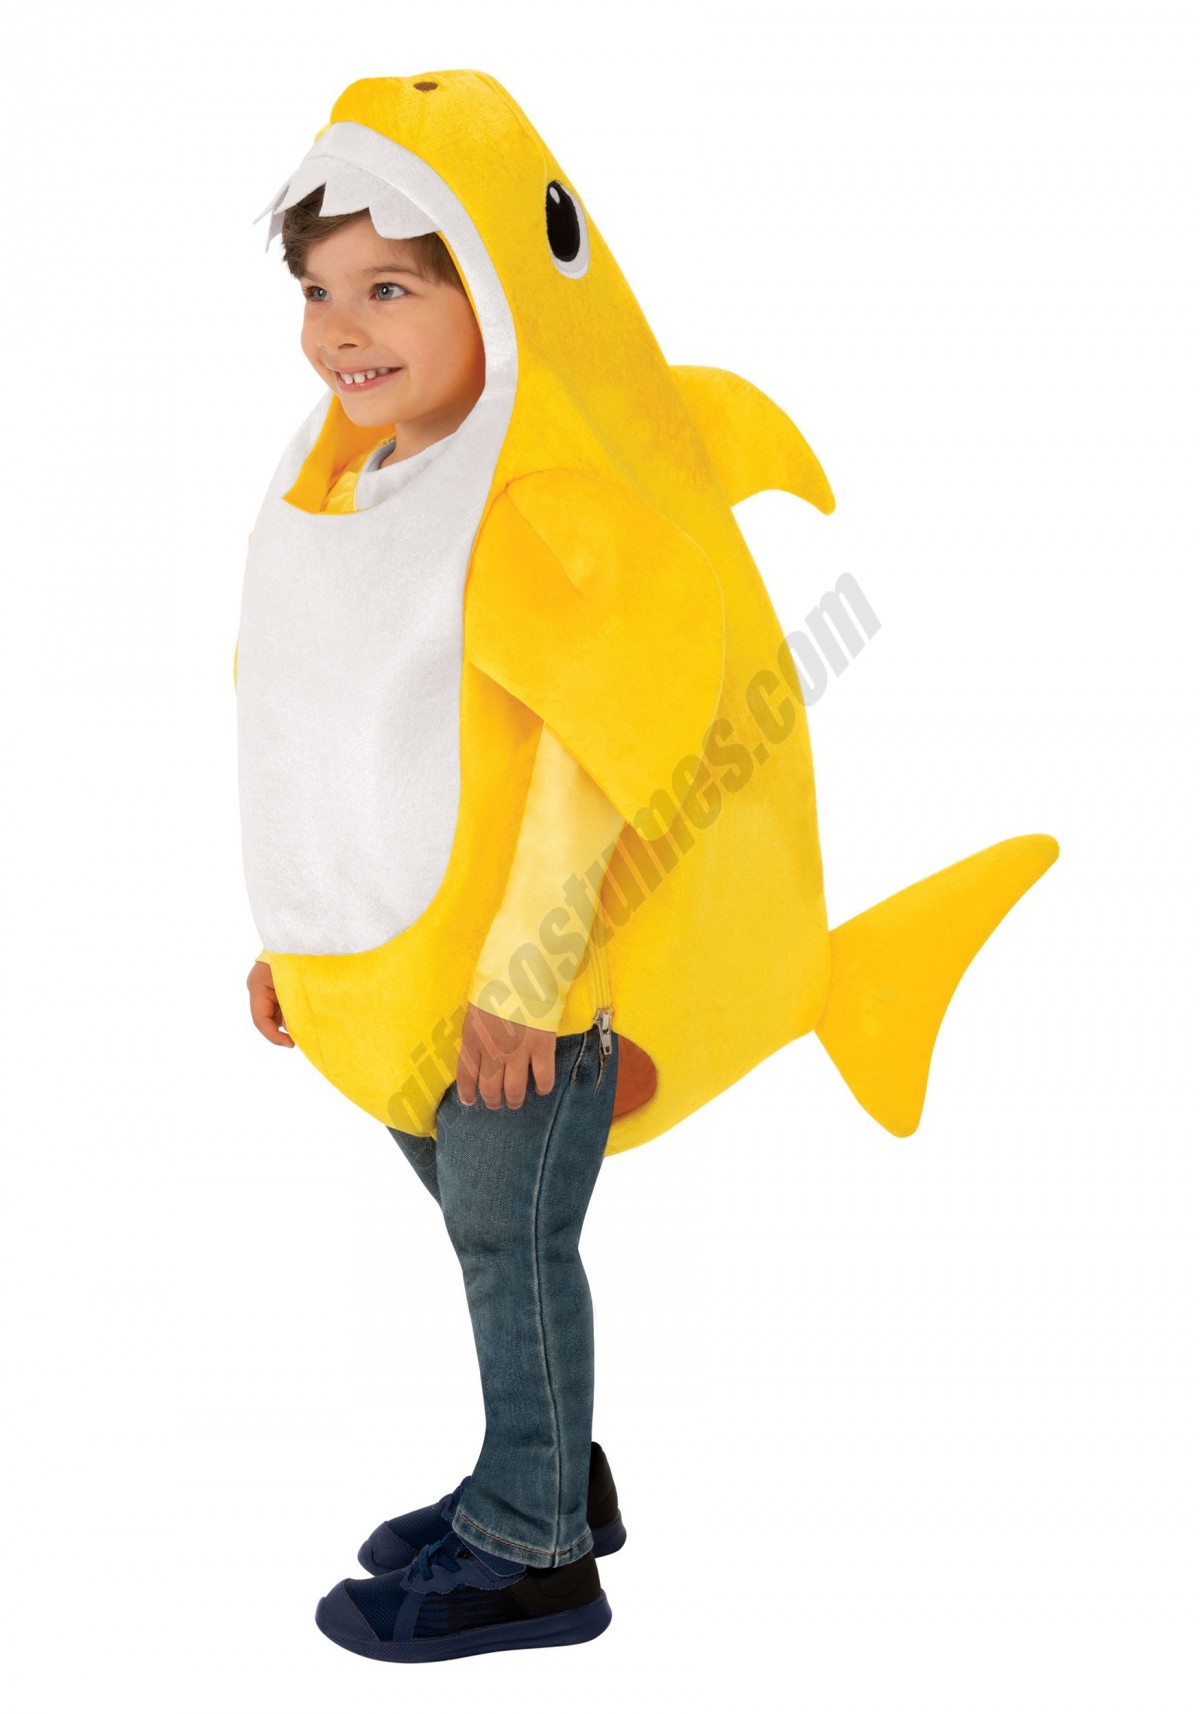 Baby Shark Toddler Costume with Sound Chip Promotions - -1